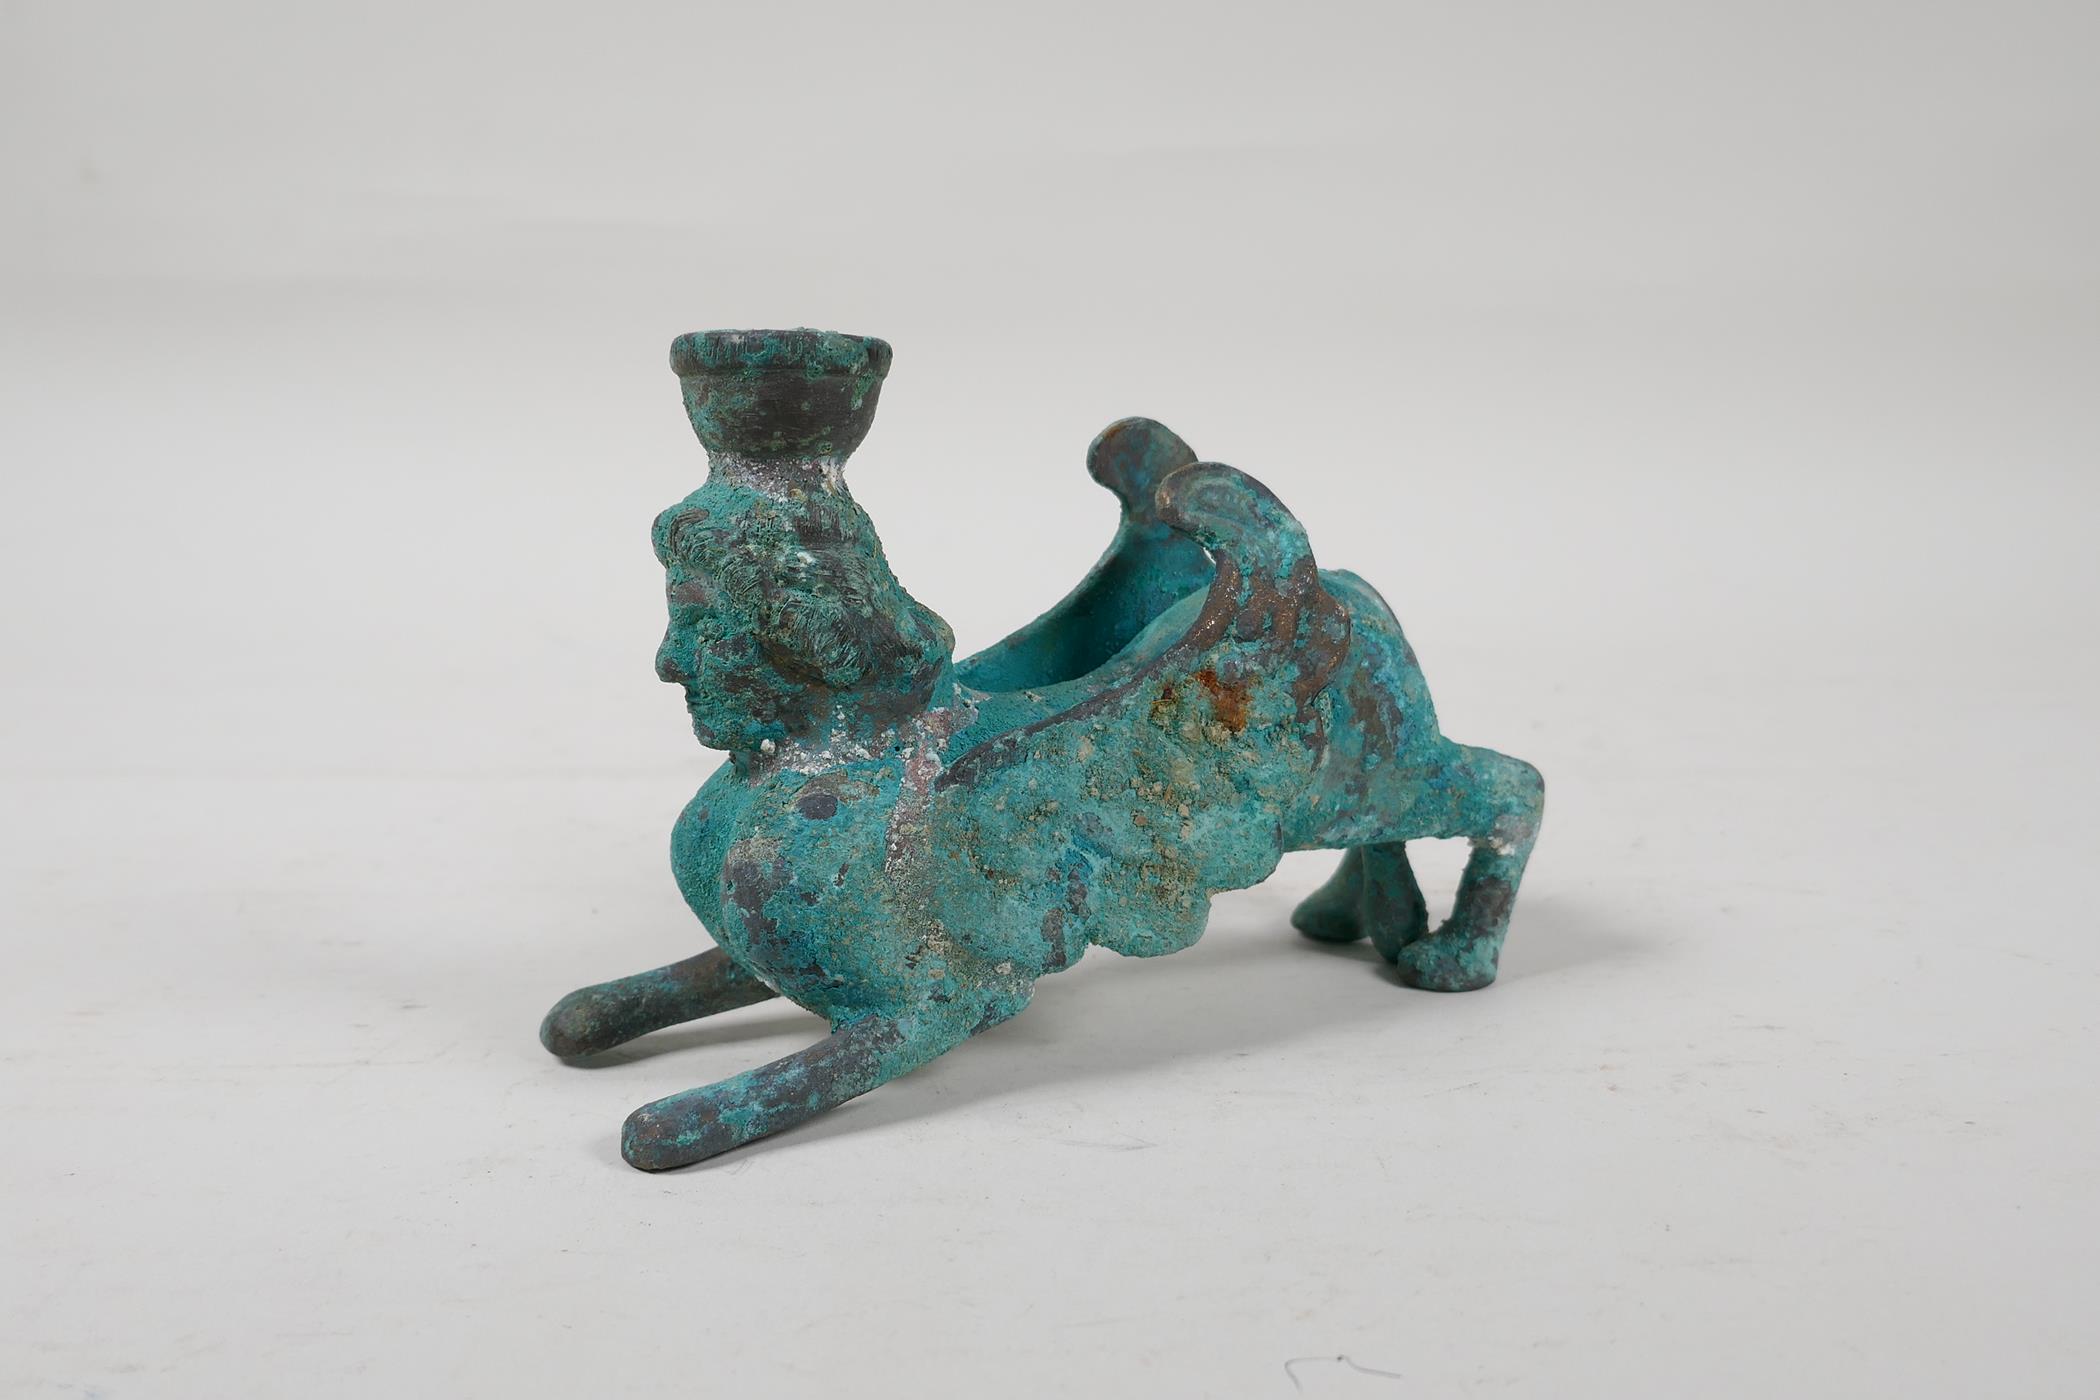 An antique bronze candlestick in the form of a Harpy, with verdigris patina, 5½" long - Image 3 of 4